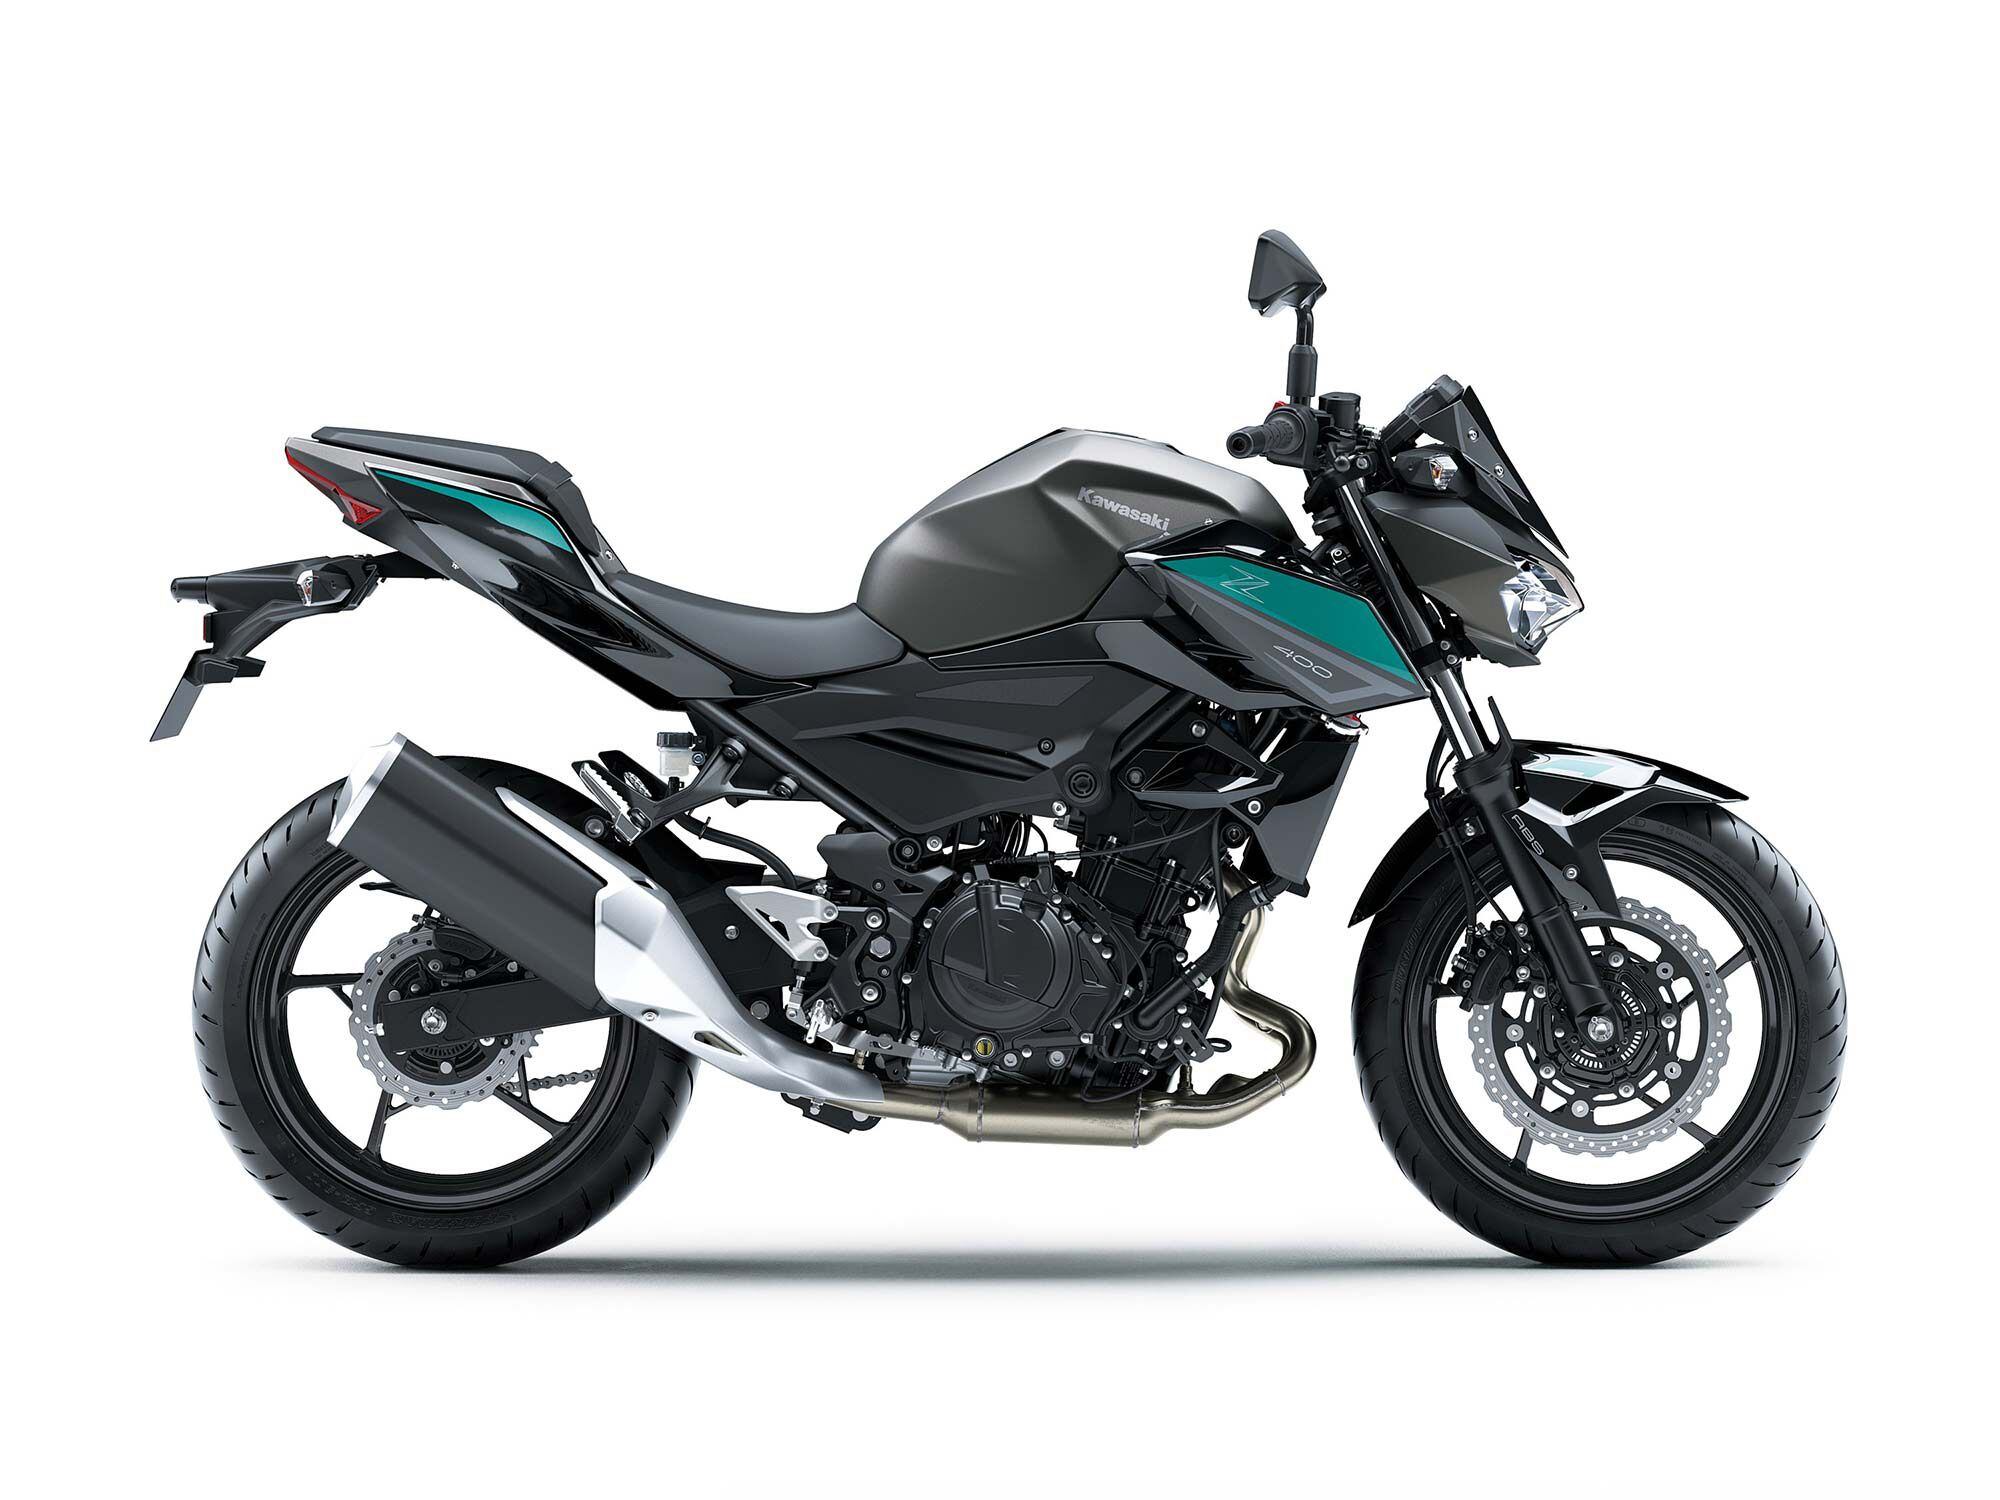 A touch of teal breaks up the Metallic Matte Graphenesteel Gray and Metallic Spark Black on the new Z.